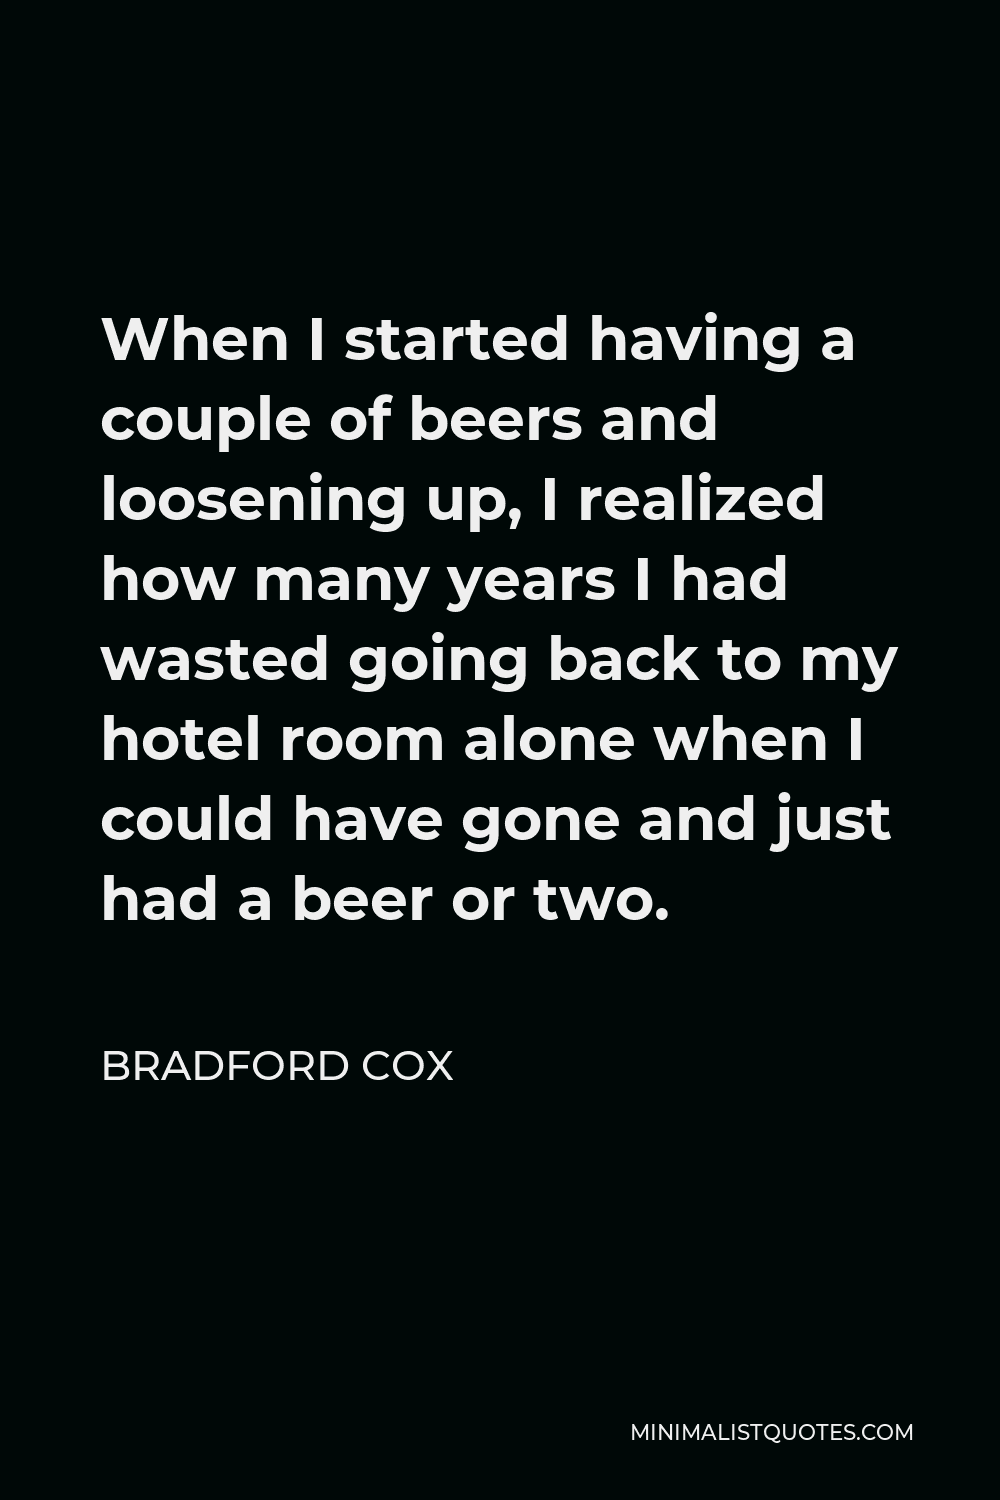 Bradford Cox Quote - When I started having a couple of beers and loosening up, I realized how many years I had wasted going back to my hotel room alone when I could have gone and just had a beer or two.